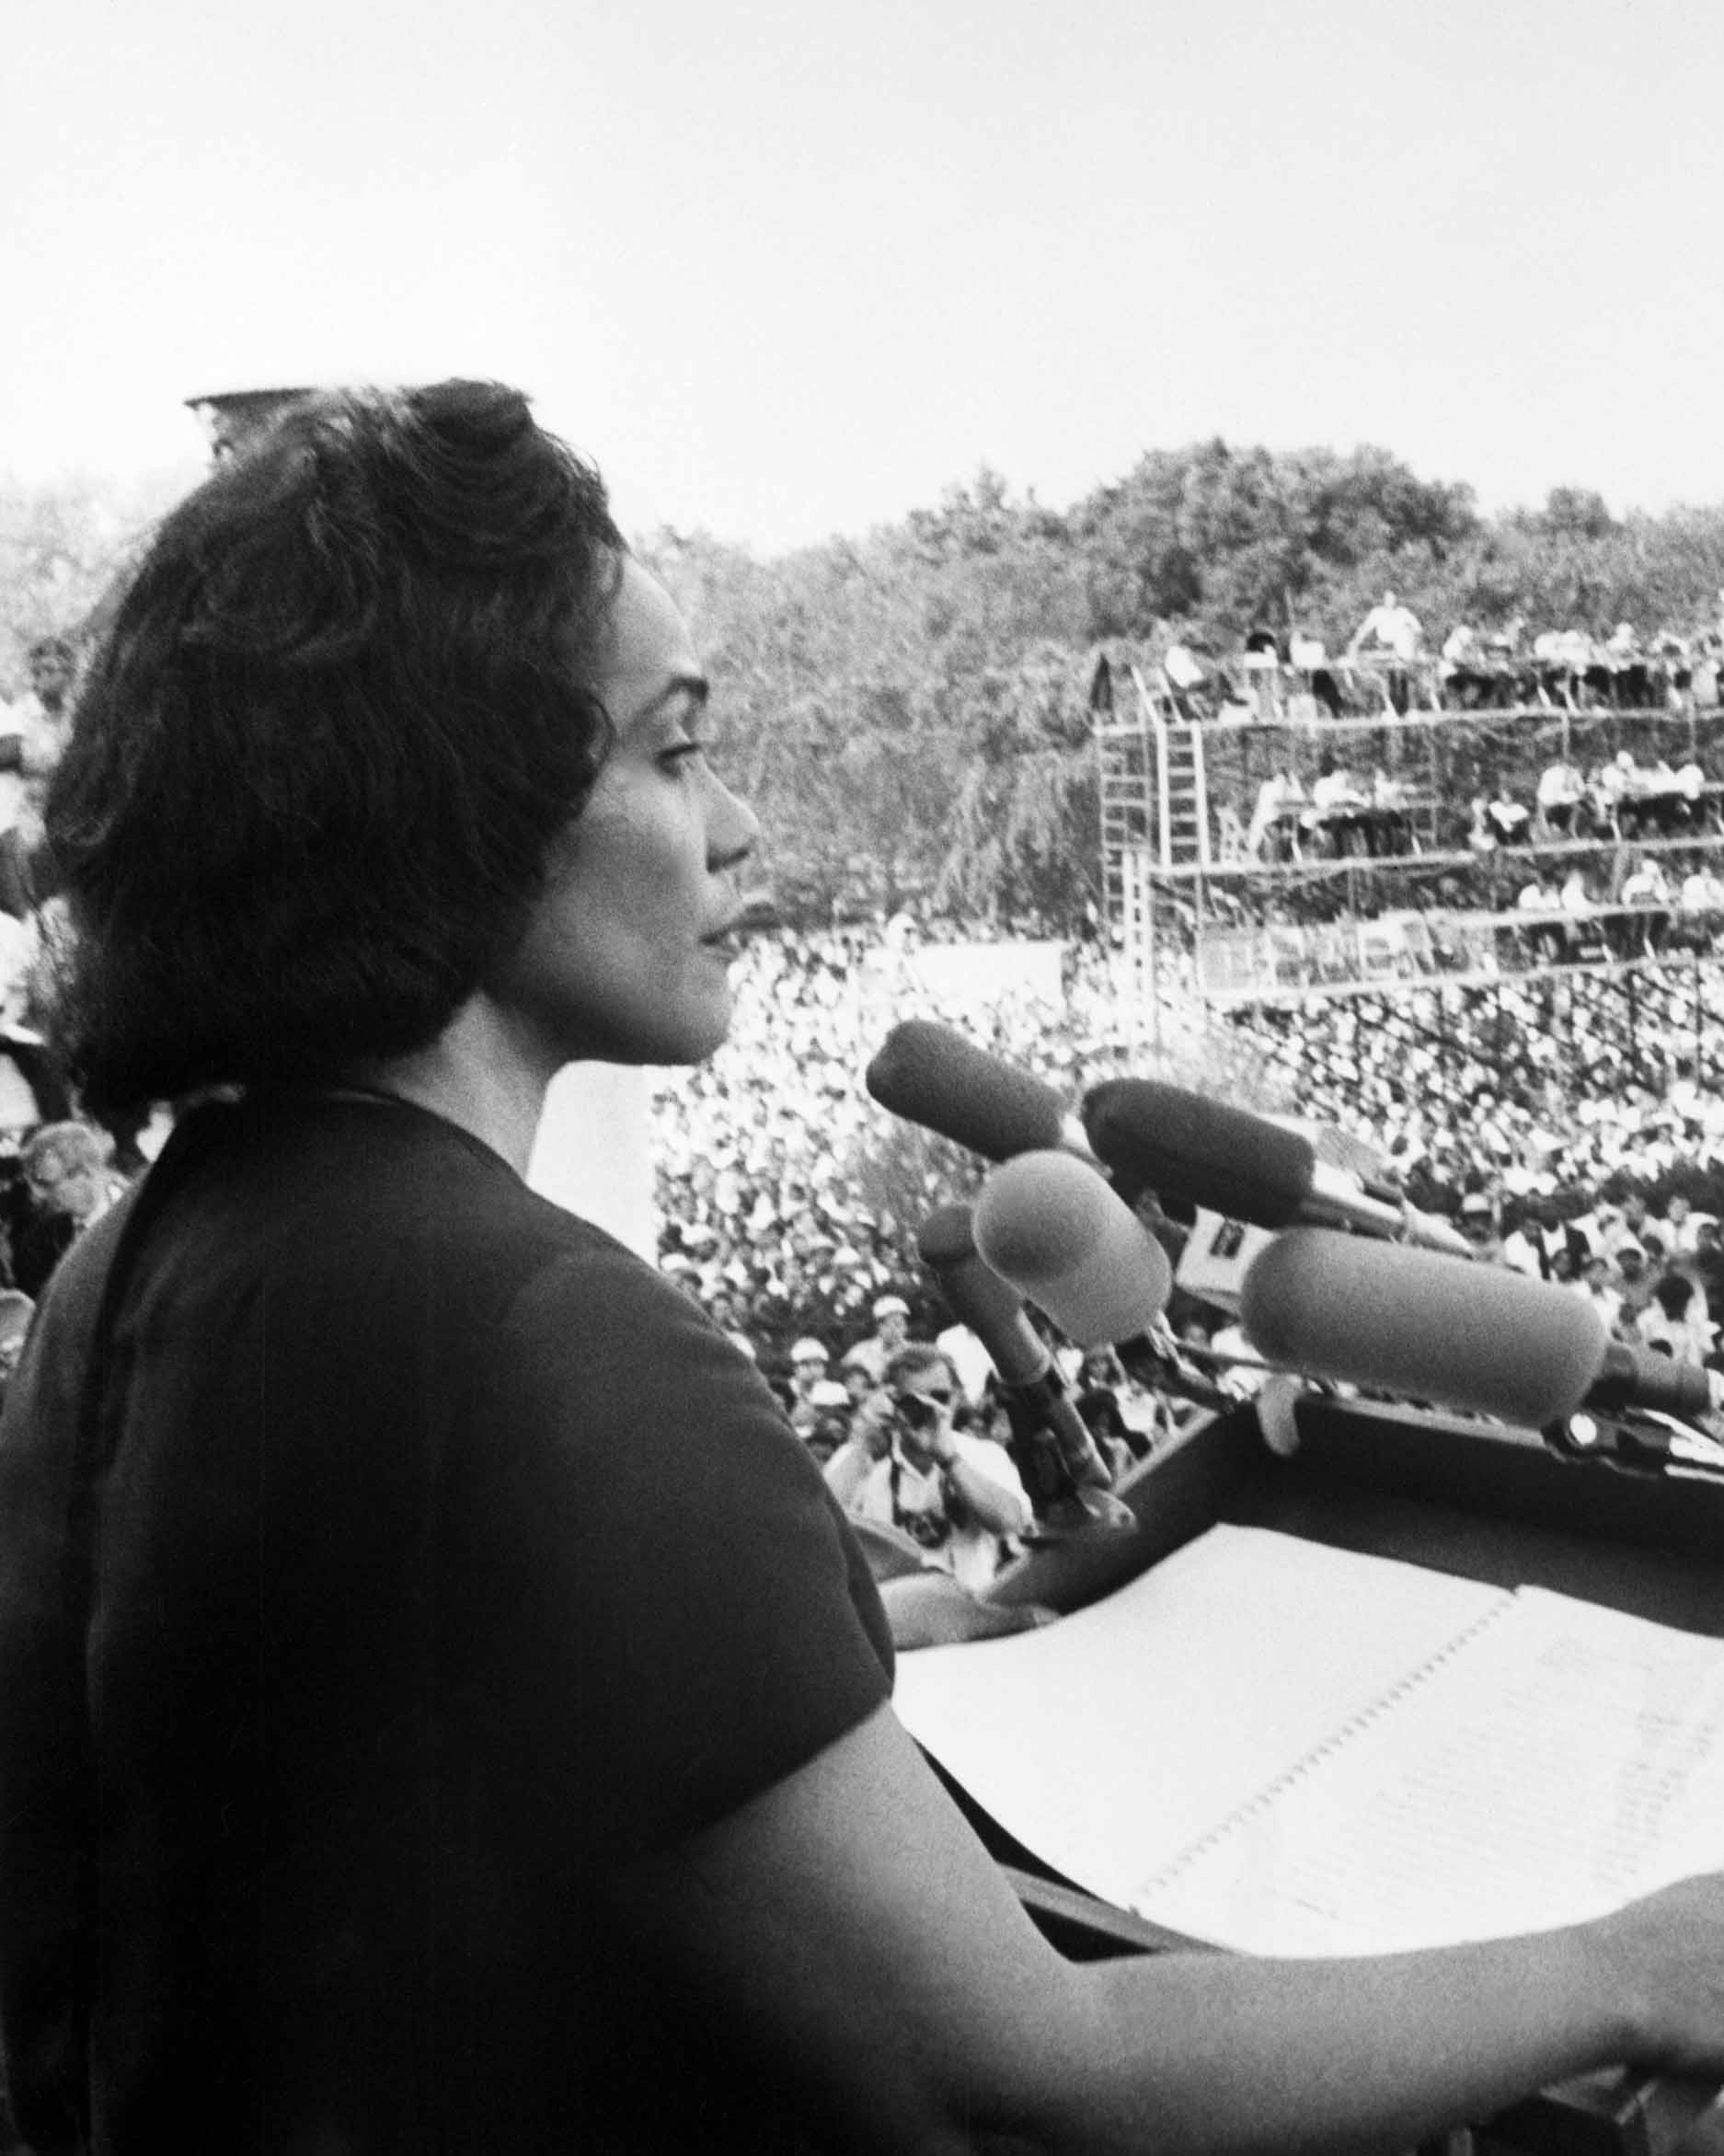 Coretta Scott King addresses the "Solidarity Day" rally of the Poor People's Campaign from the steps of the Lincoln Memorial.